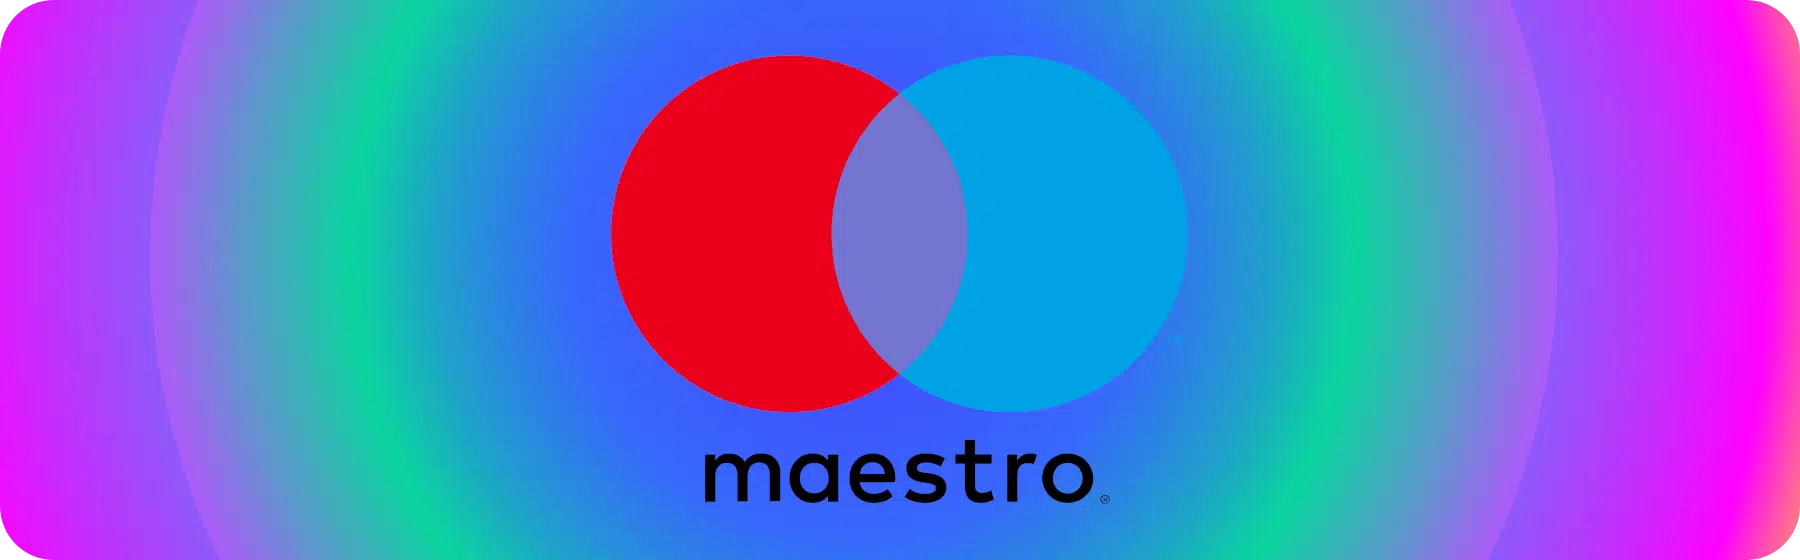 logo for maestro payment method